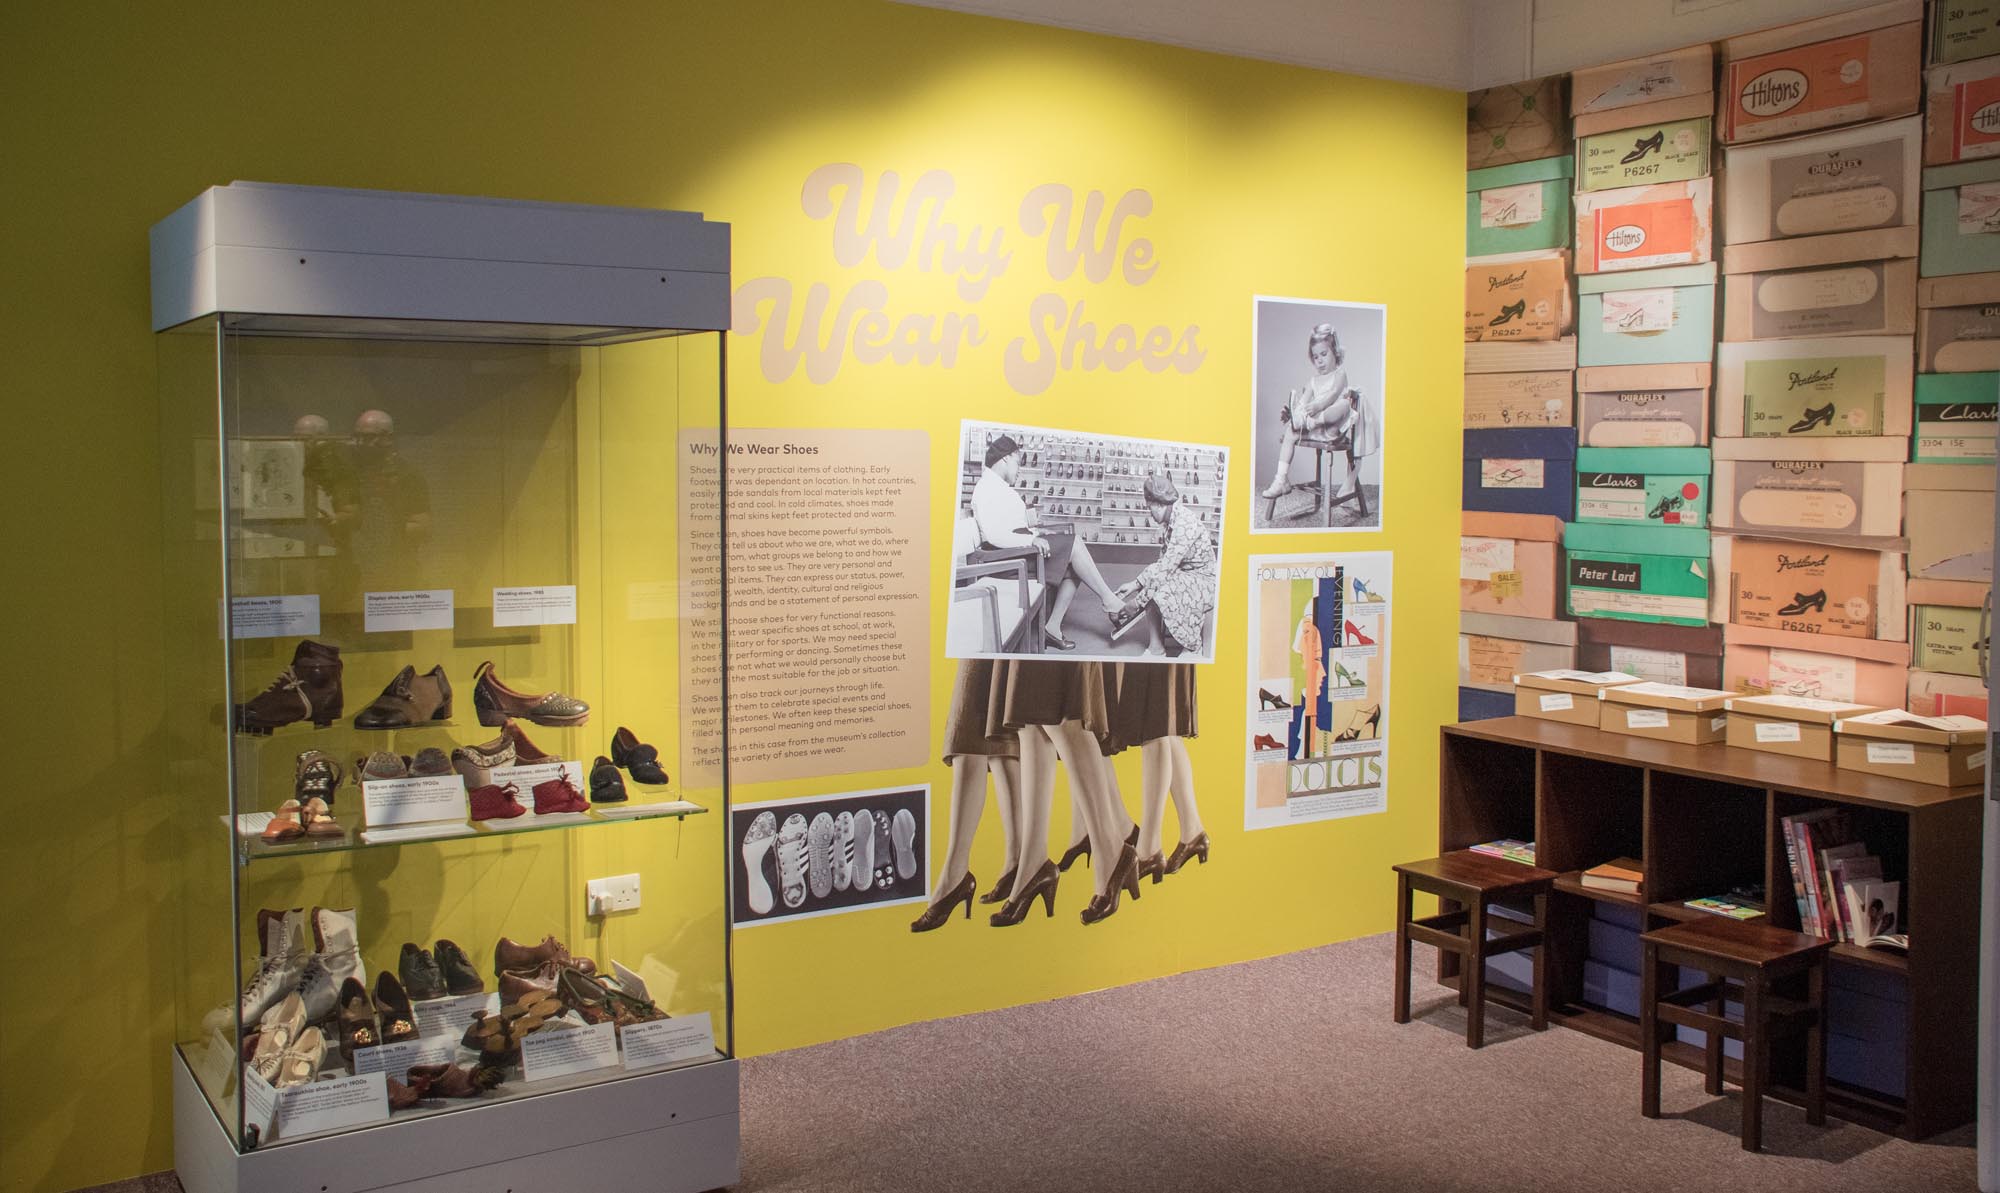 The Shoes exhibition at Newarke Houses